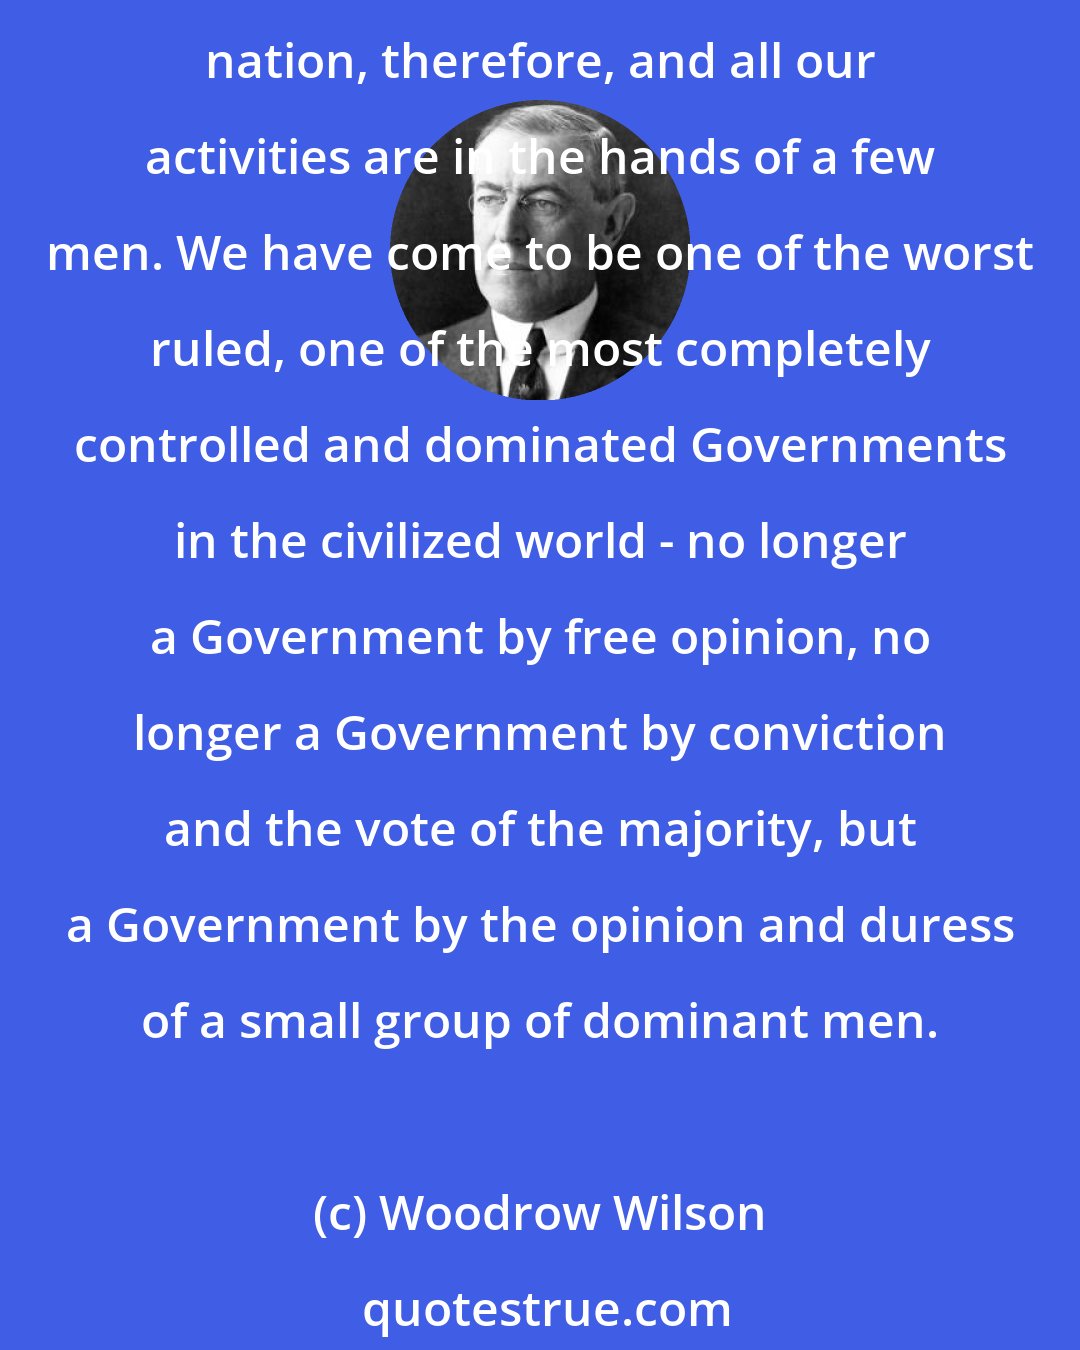 Woodrow Wilson: I am a most unhappy man. I have unwittingly ruined my country. A great industrial nation is controlled by its system of credit. Our system of credit is concentrated. The growth of the nation, therefore, and all our activities are in the hands of a few men. We have come to be one of the worst ruled, one of the most completely controlled and dominated Governments in the civilized world - no longer a Government by free opinion, no longer a Government by conviction and the vote of the majority, but a Government by the opinion and duress of a small group of dominant men.